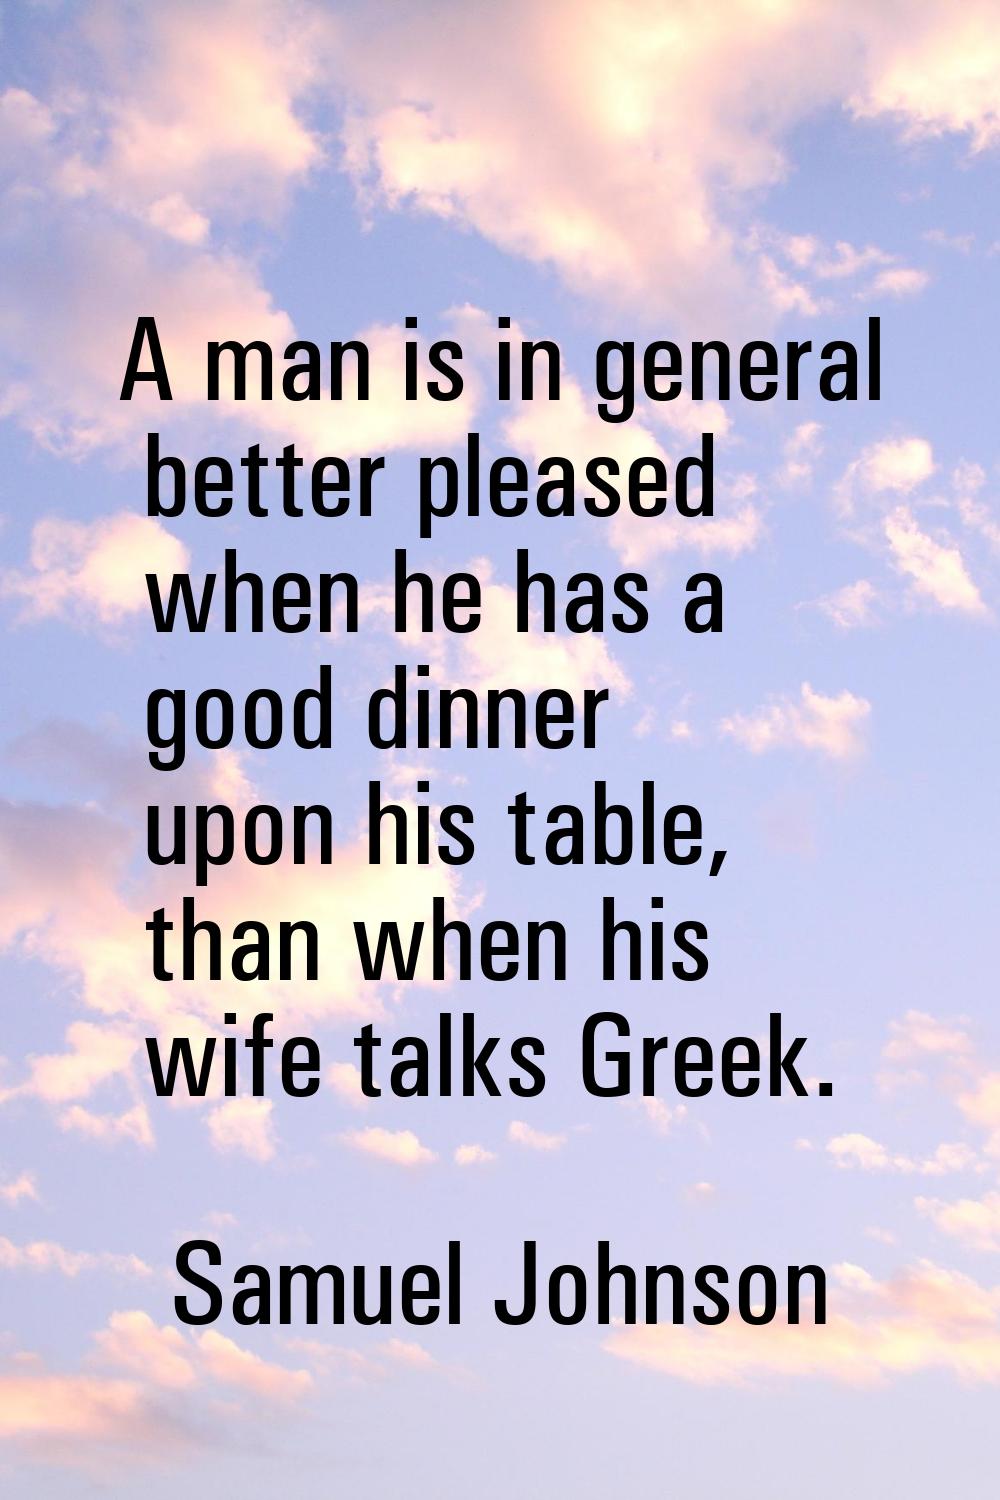 A man is in general better pleased when he has a good dinner upon his table, than when his wife tal